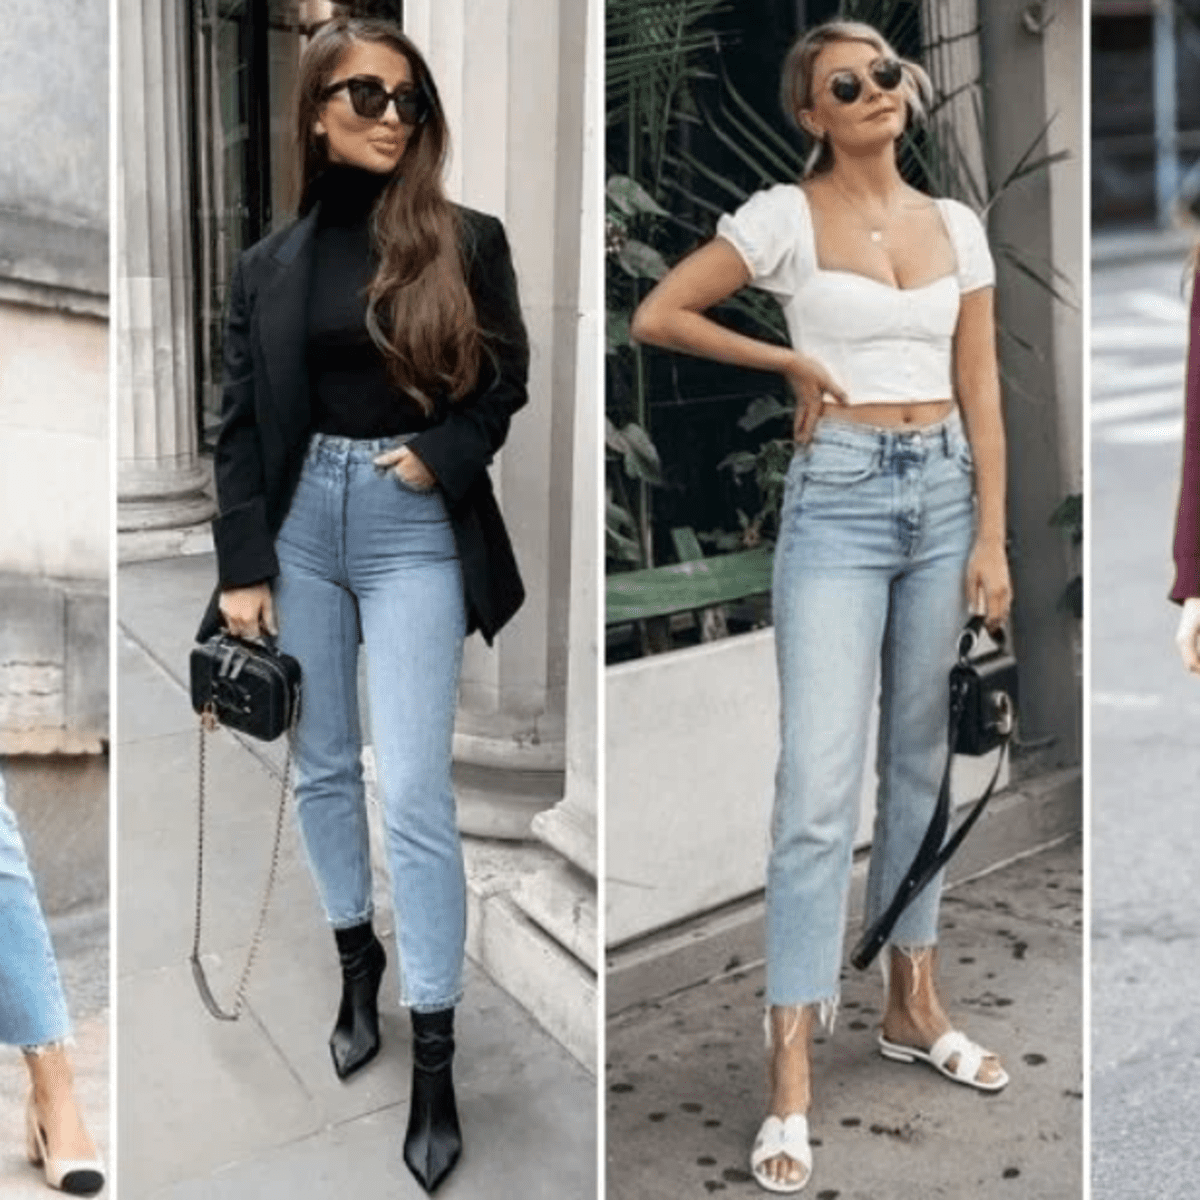 The Complete Pants Guide for Petite Women - Petite Dressing  Petite style  outfits, Fashion for petite women, Short girl outfits